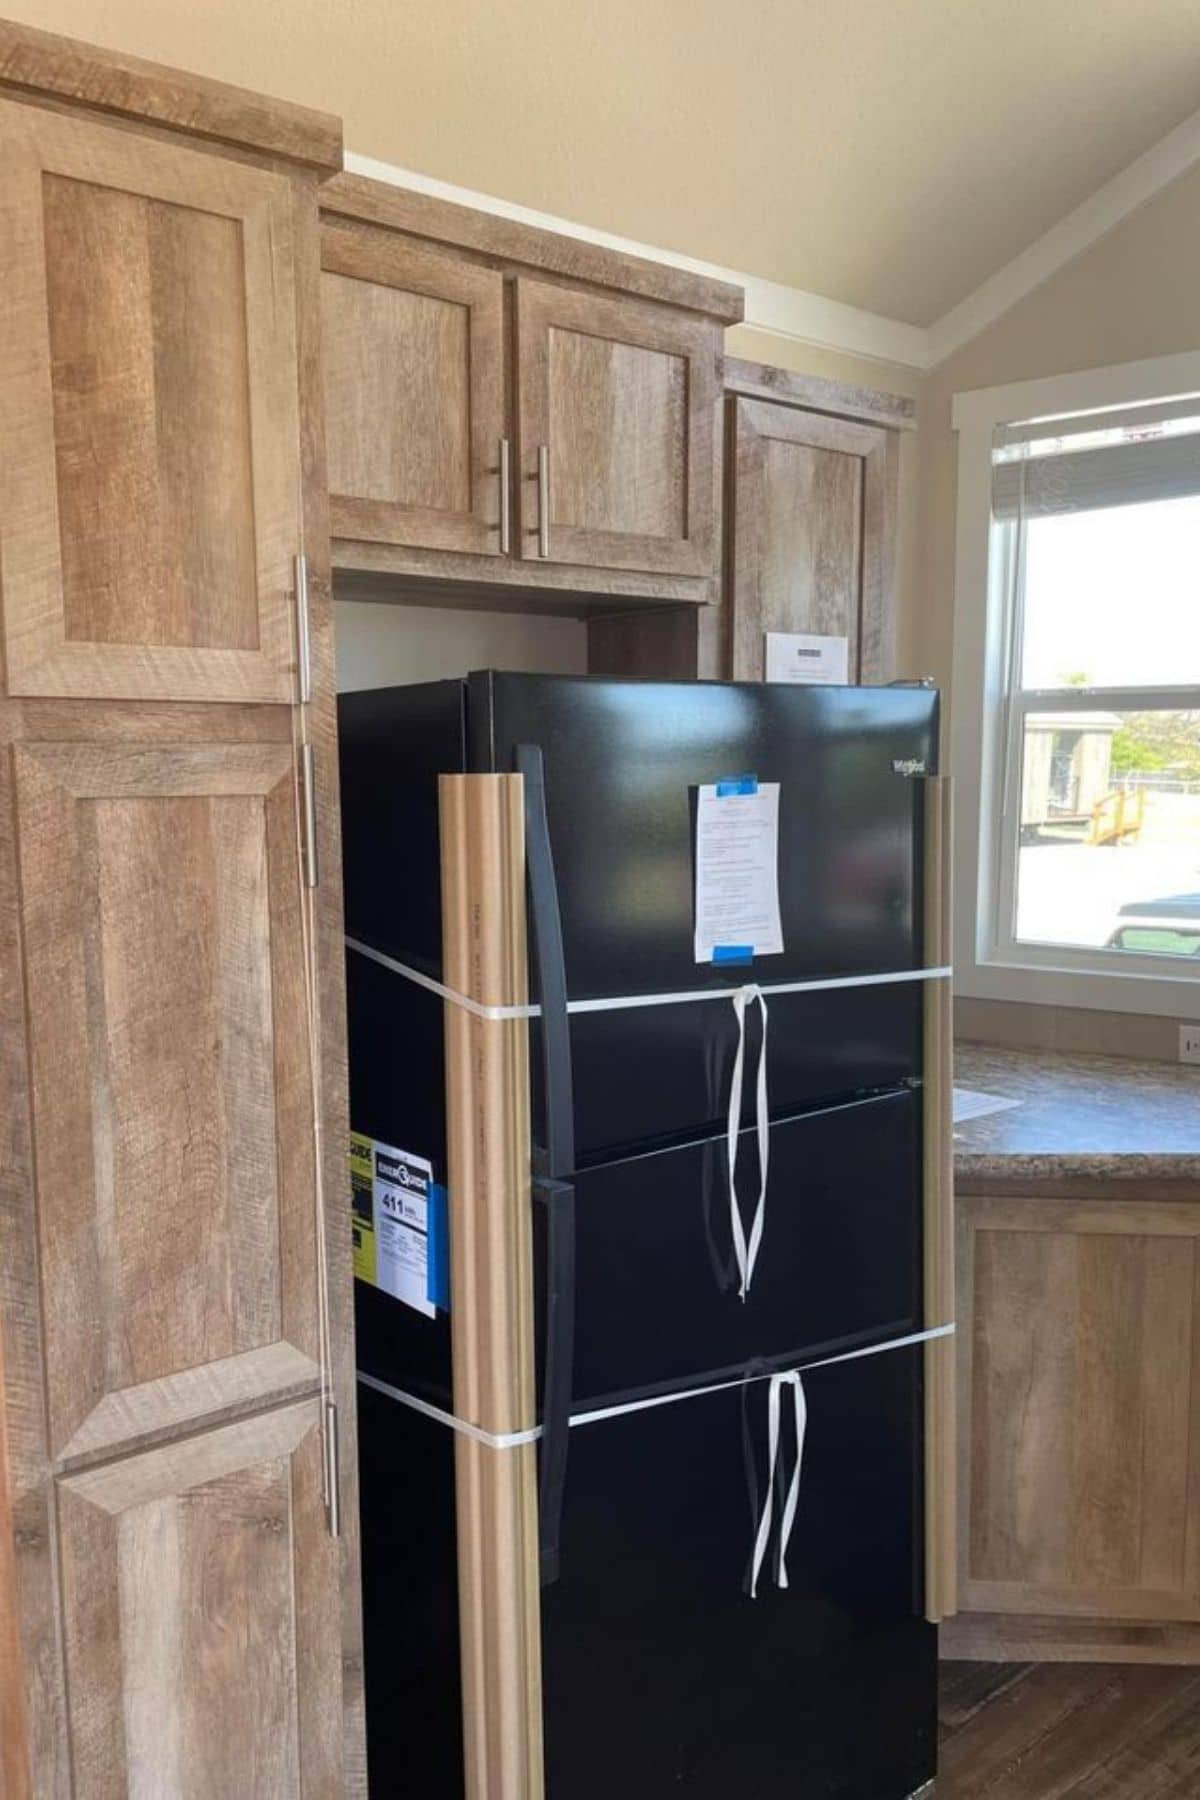 black refrigerator in between wood cabinets in kitchen